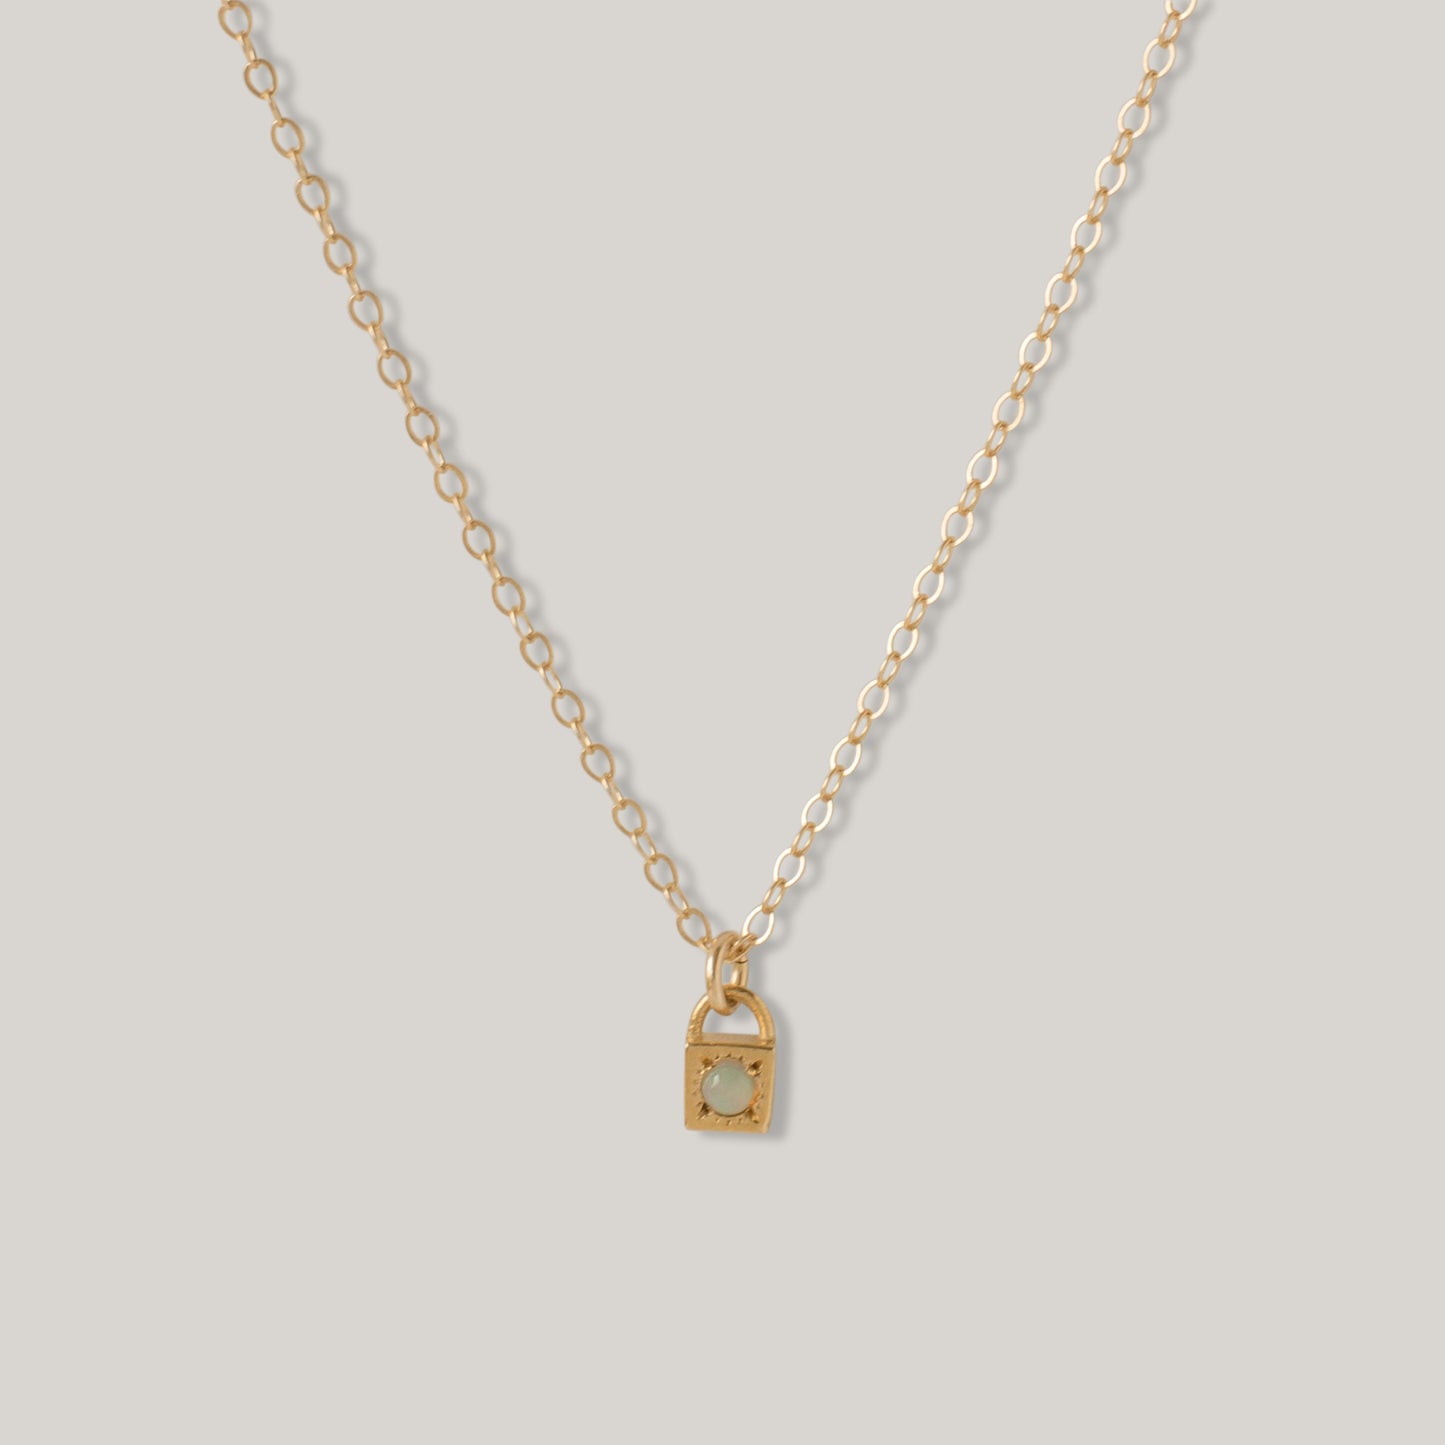 MEREWIF LONER NECKLACE - OPAL